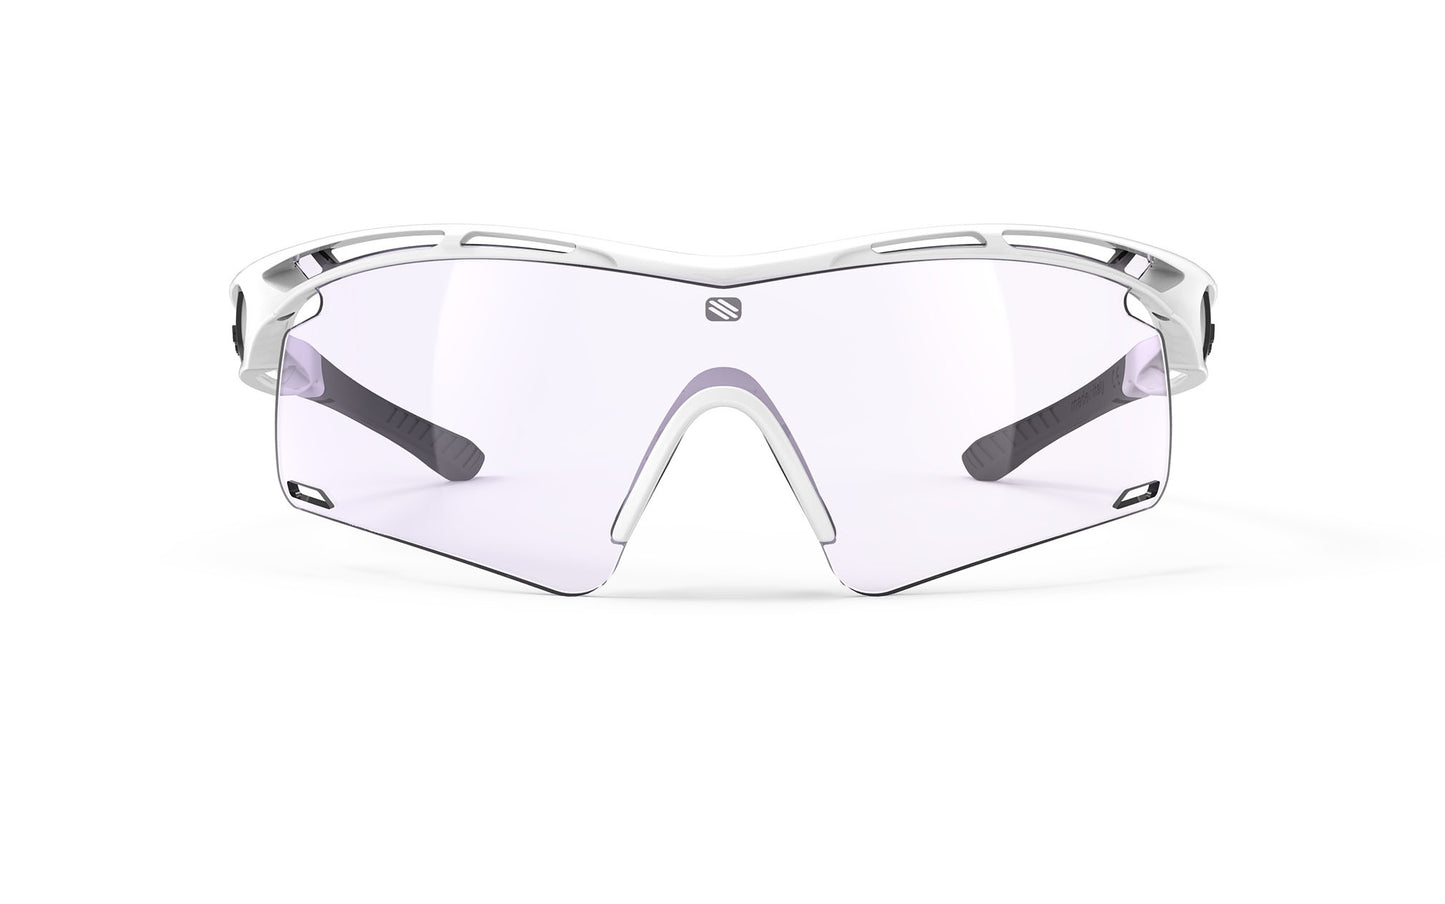 Load image into Gallery viewer, Rudy Project Tralyx+ Golf White Gloss Impactx Photochromic 2 Laser Purple Sunglasses
